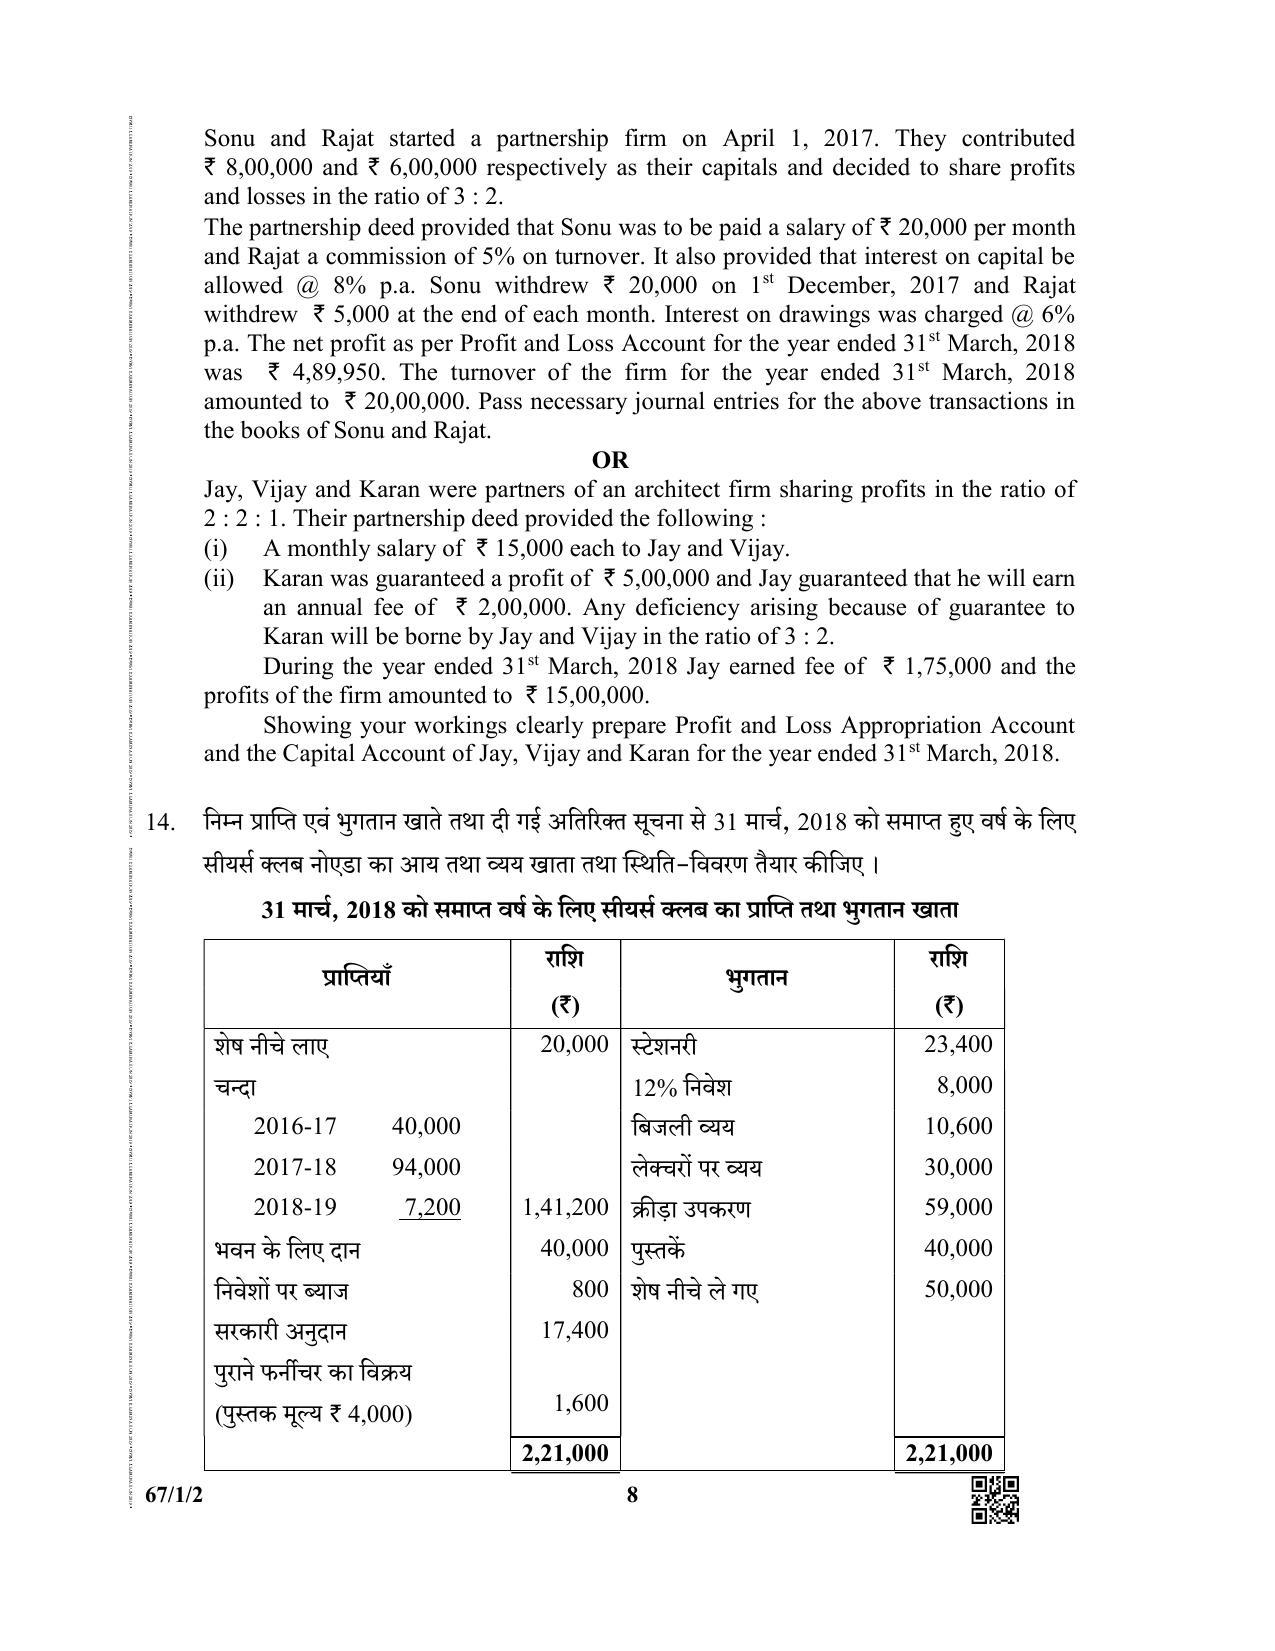 CBSE Class 12 67-1-2  (Accountancy) 2019 Question Paper - Page 8